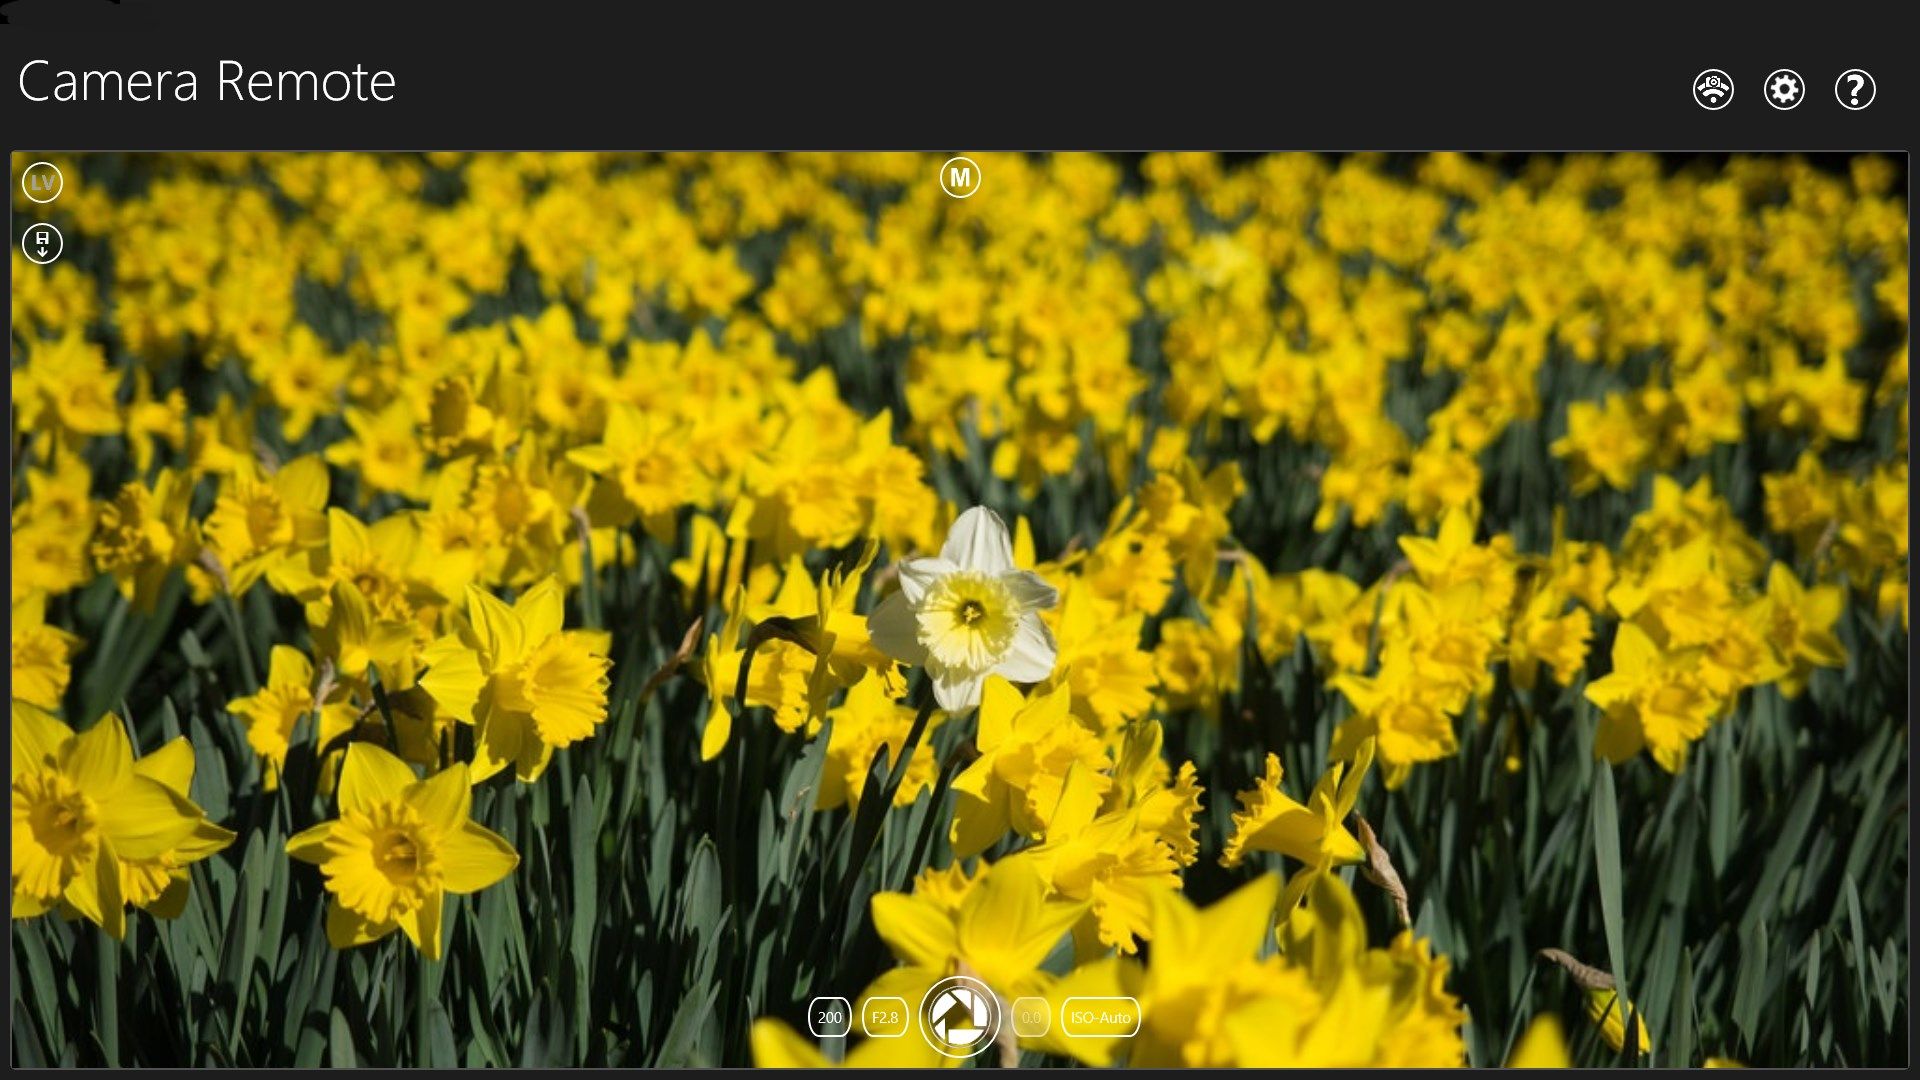 Take your photo and review it on your Windows device. Zoom in and pan around to check the detail.